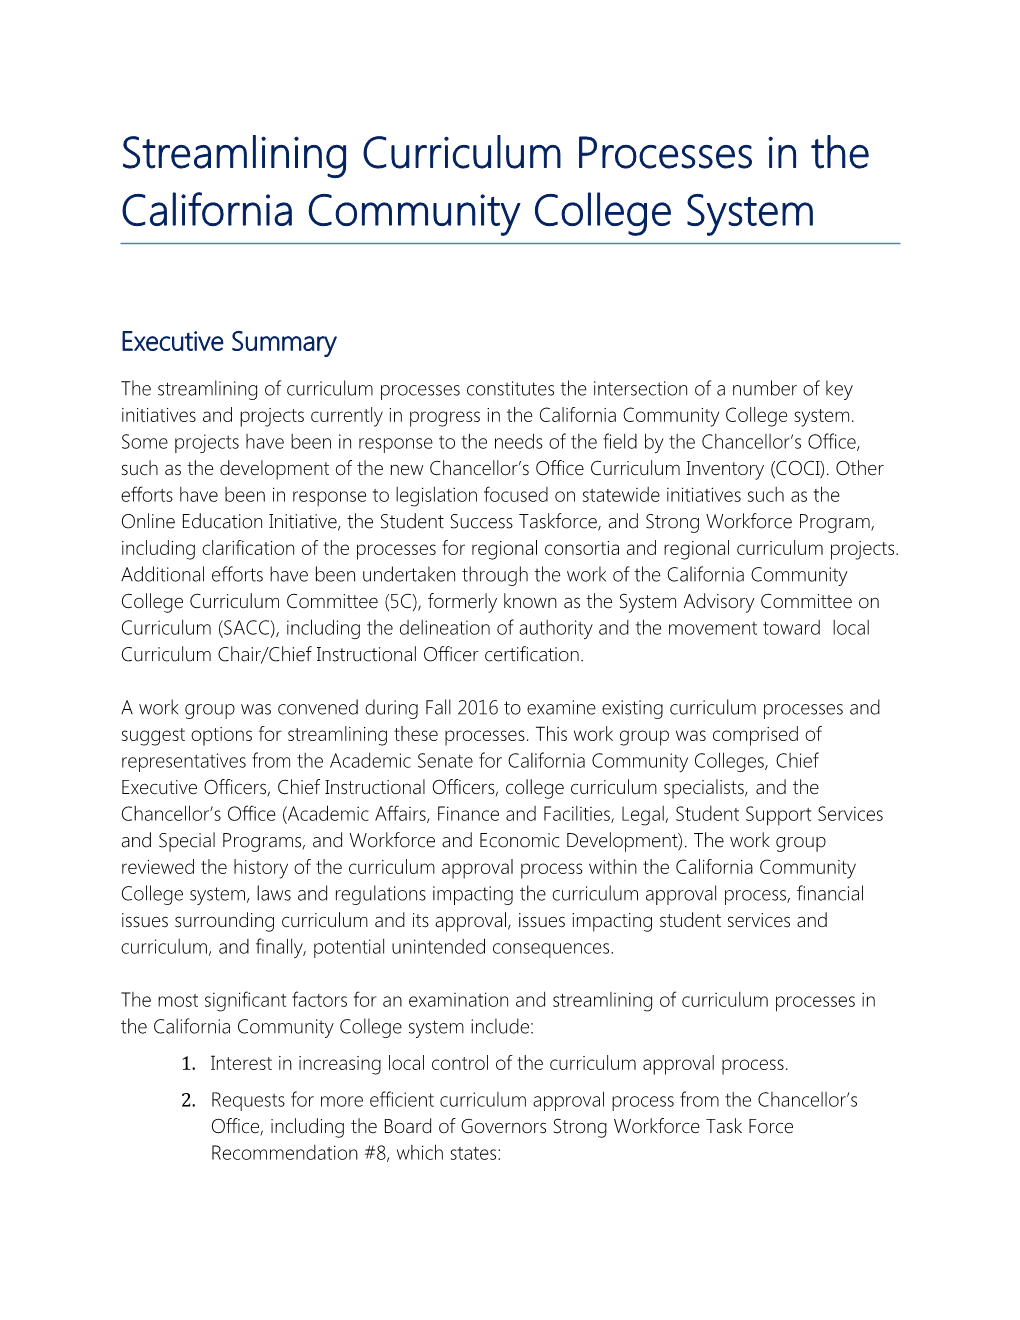 Streamlining Curriculum Processes in the California Community College System